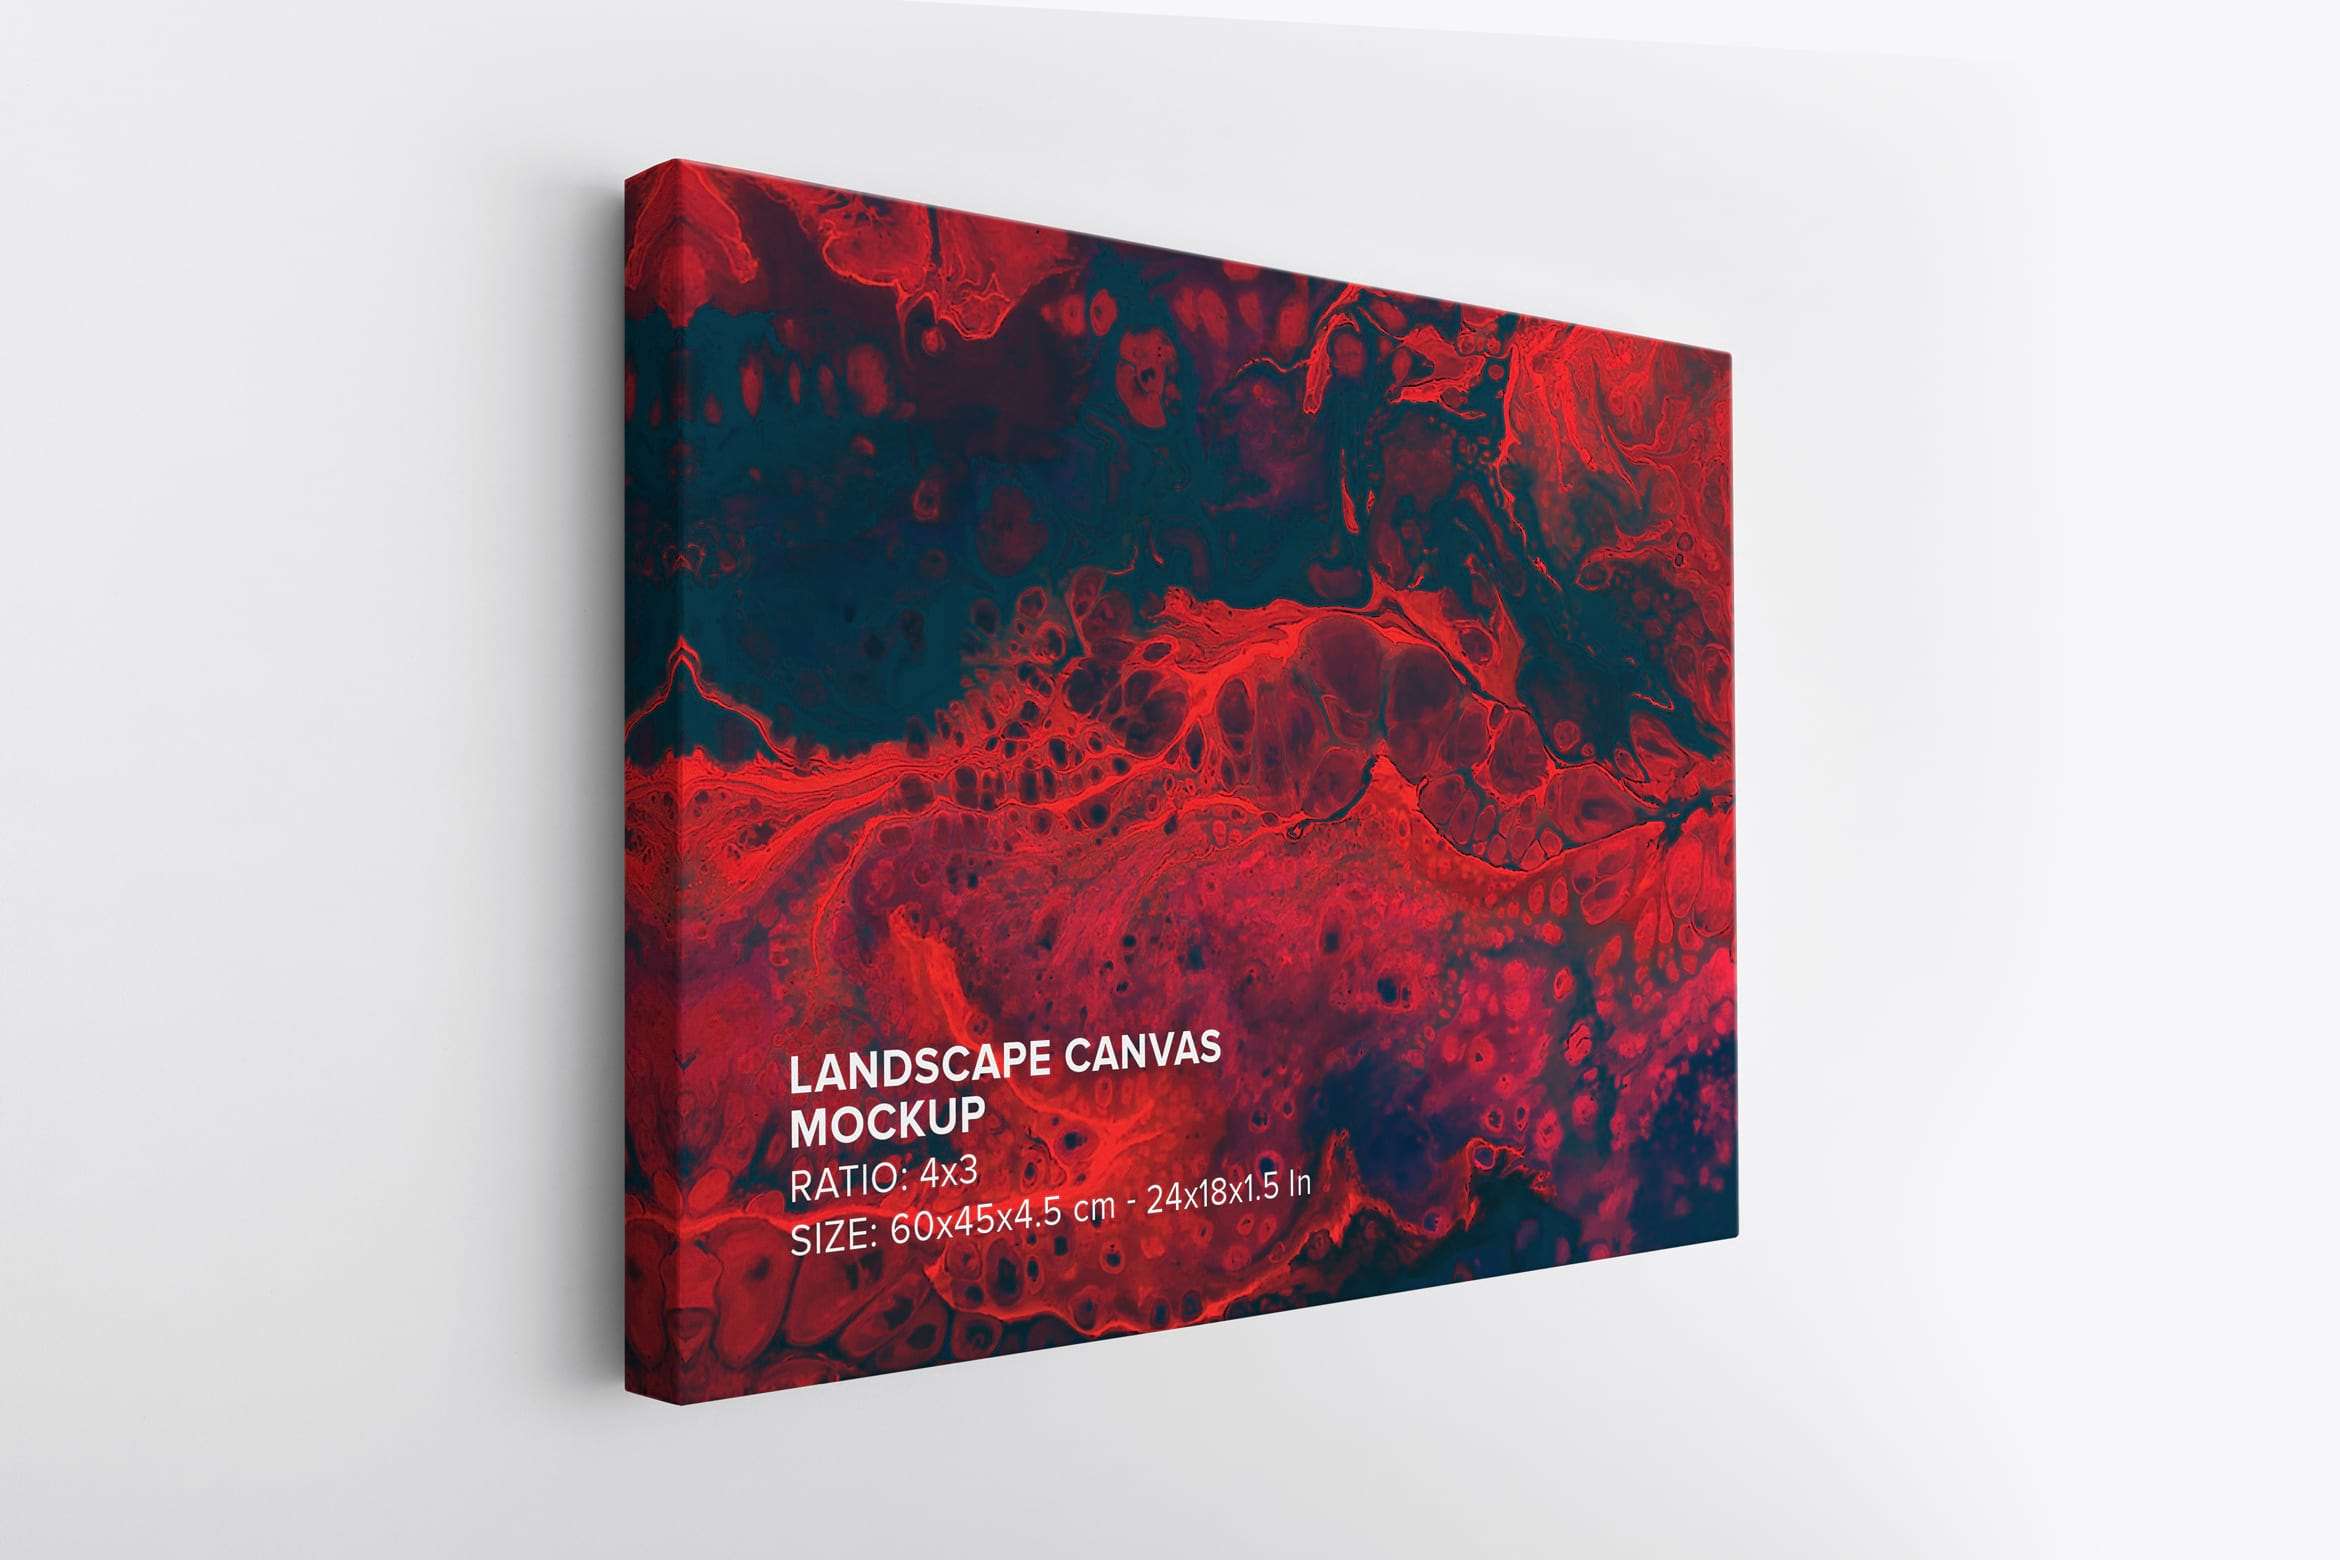 Art Wall Landscape Canvas Ratio 4x3 Mockup - Left 1.5 in Wrap View